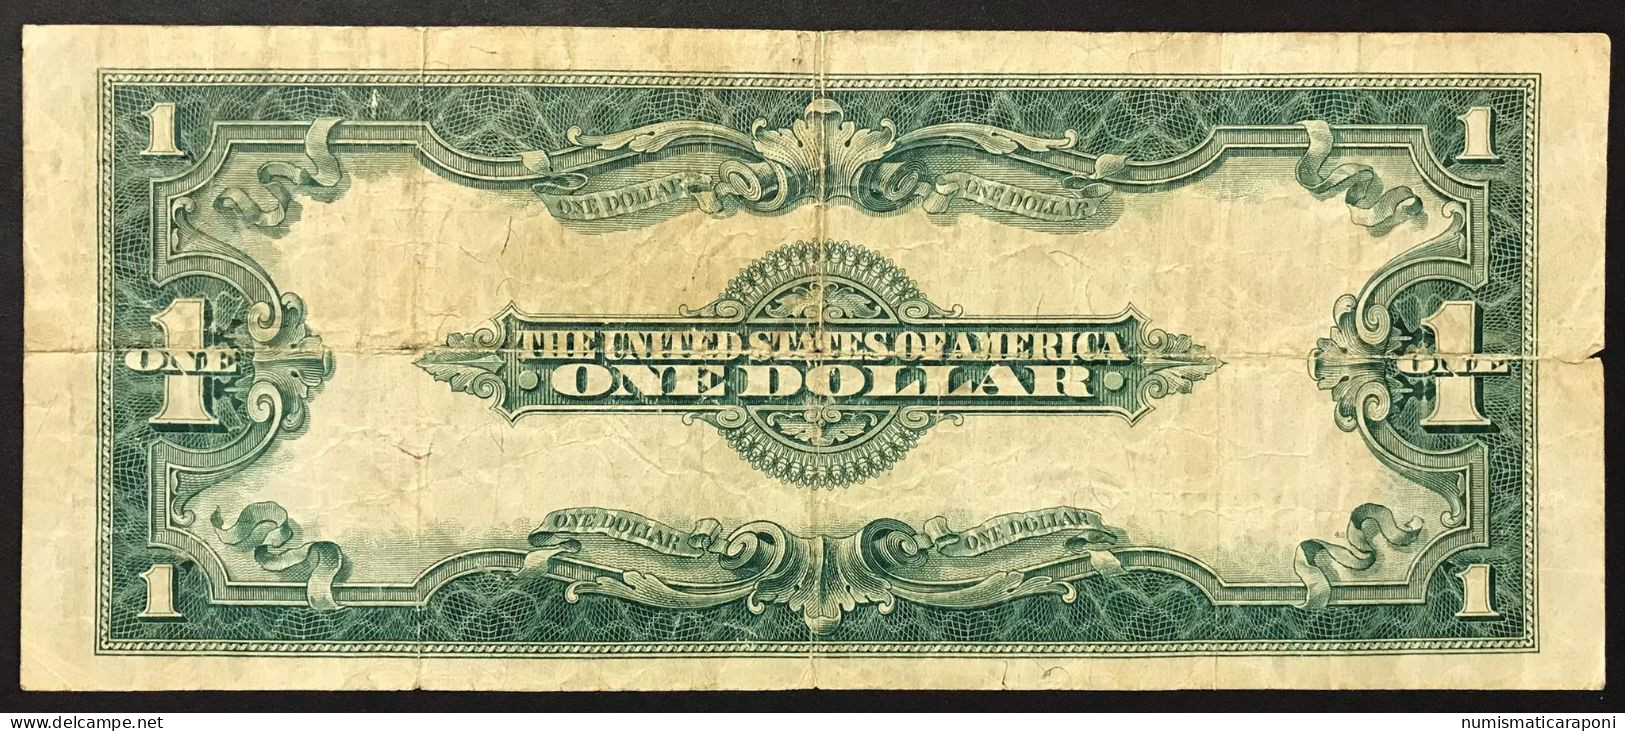 Usa U.s.a. Stati Uniti LARGE 1923 $1 DOLLAR BILL RED SEAL UNITED STATES LEGAL TENDER NOTE  LOTTO.309 - Certificats D'Argent (1878-1923)